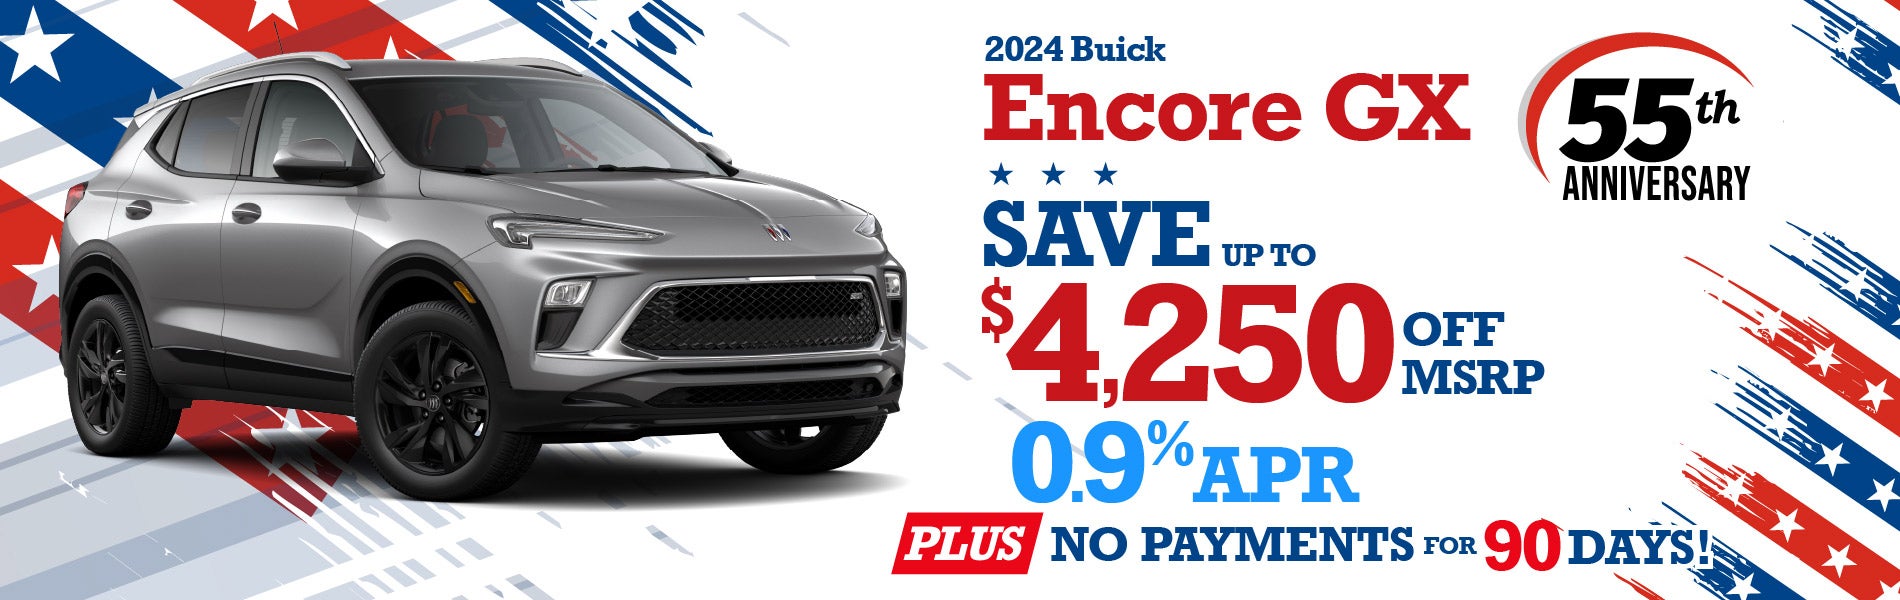 2024 Buick Encore GX - up to $4250 off or 0.9% APR for 36m